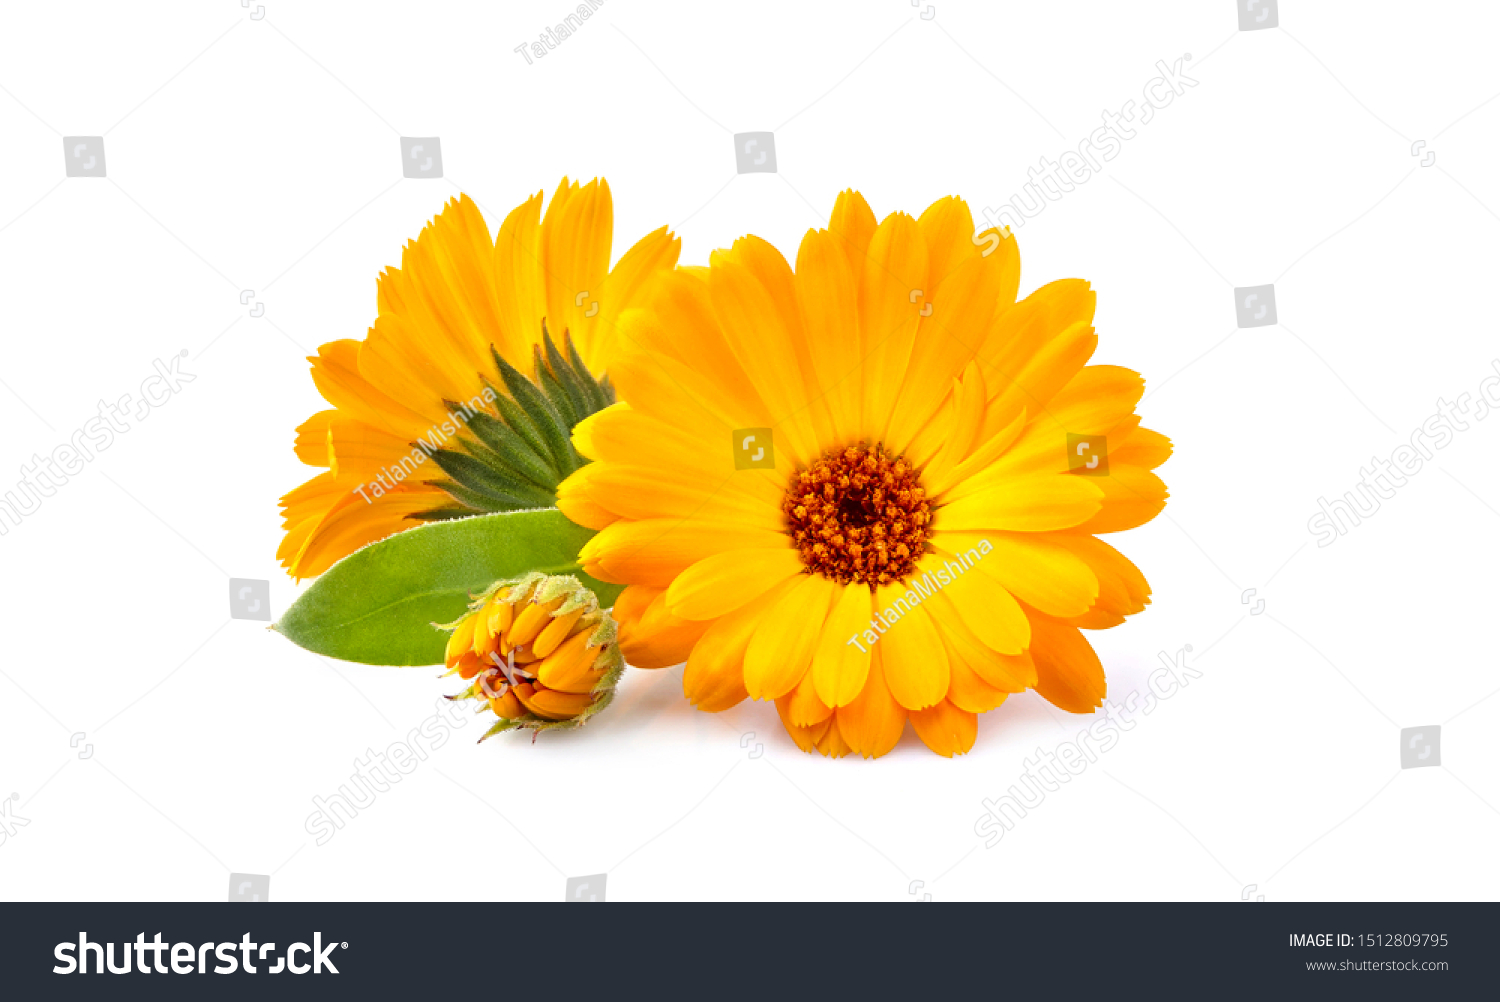 Calendula. Flowers with leaves isolated on white #1512809795